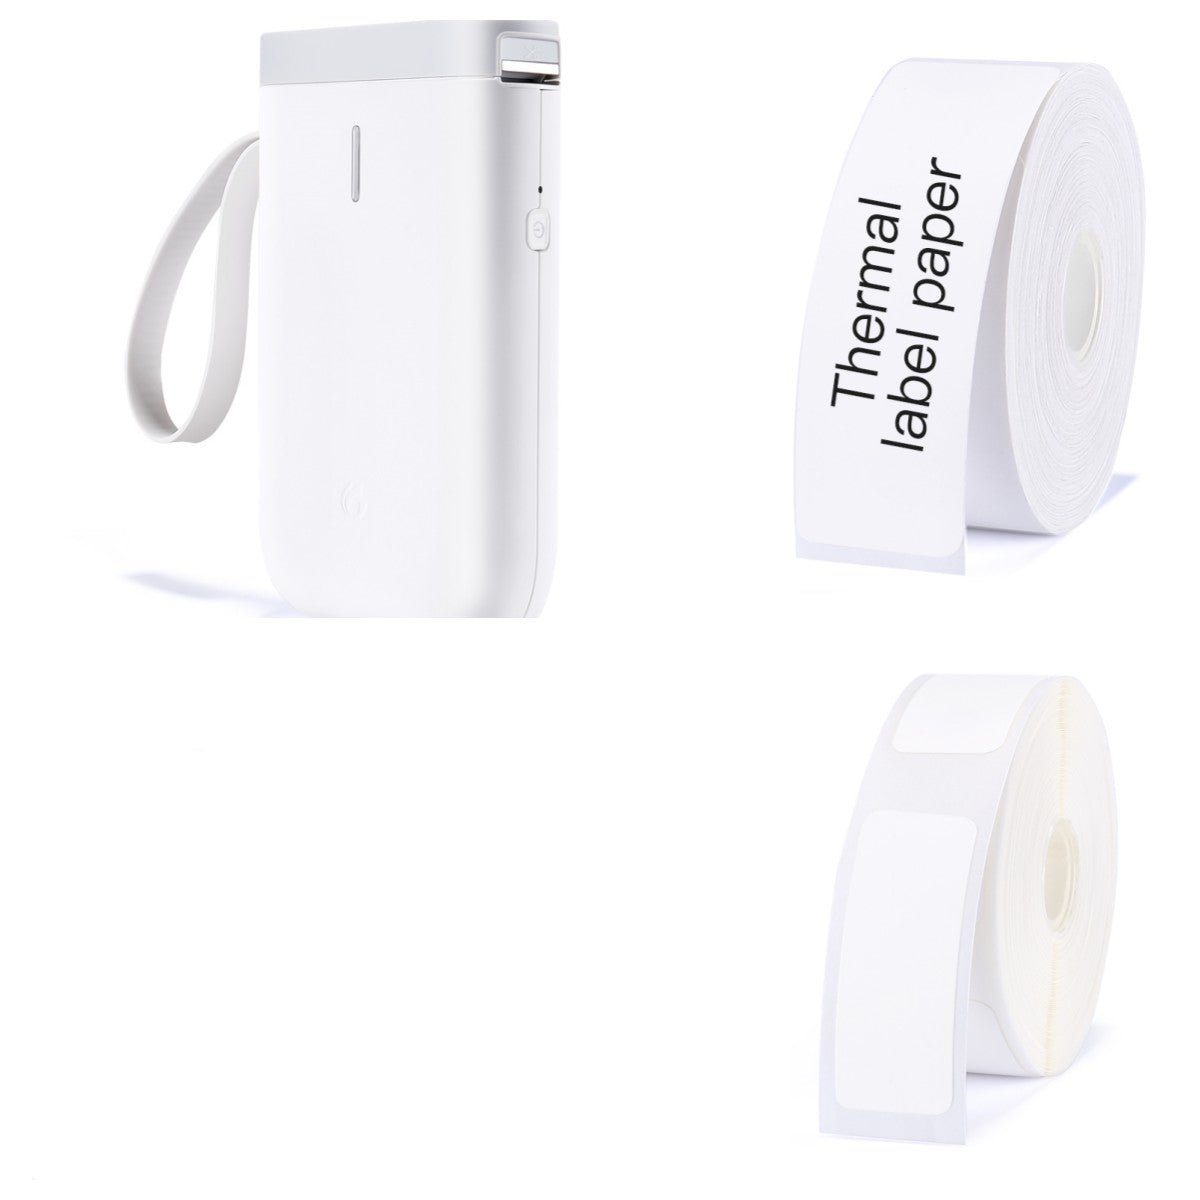 D11 Label Printer Bluetooth Household Non Drying Label Machine Fast Printing Home Use Office | office | Introducing the D11 Label Printer Bluetooth Household Non Drying Label Machine Fast Printing Home Us